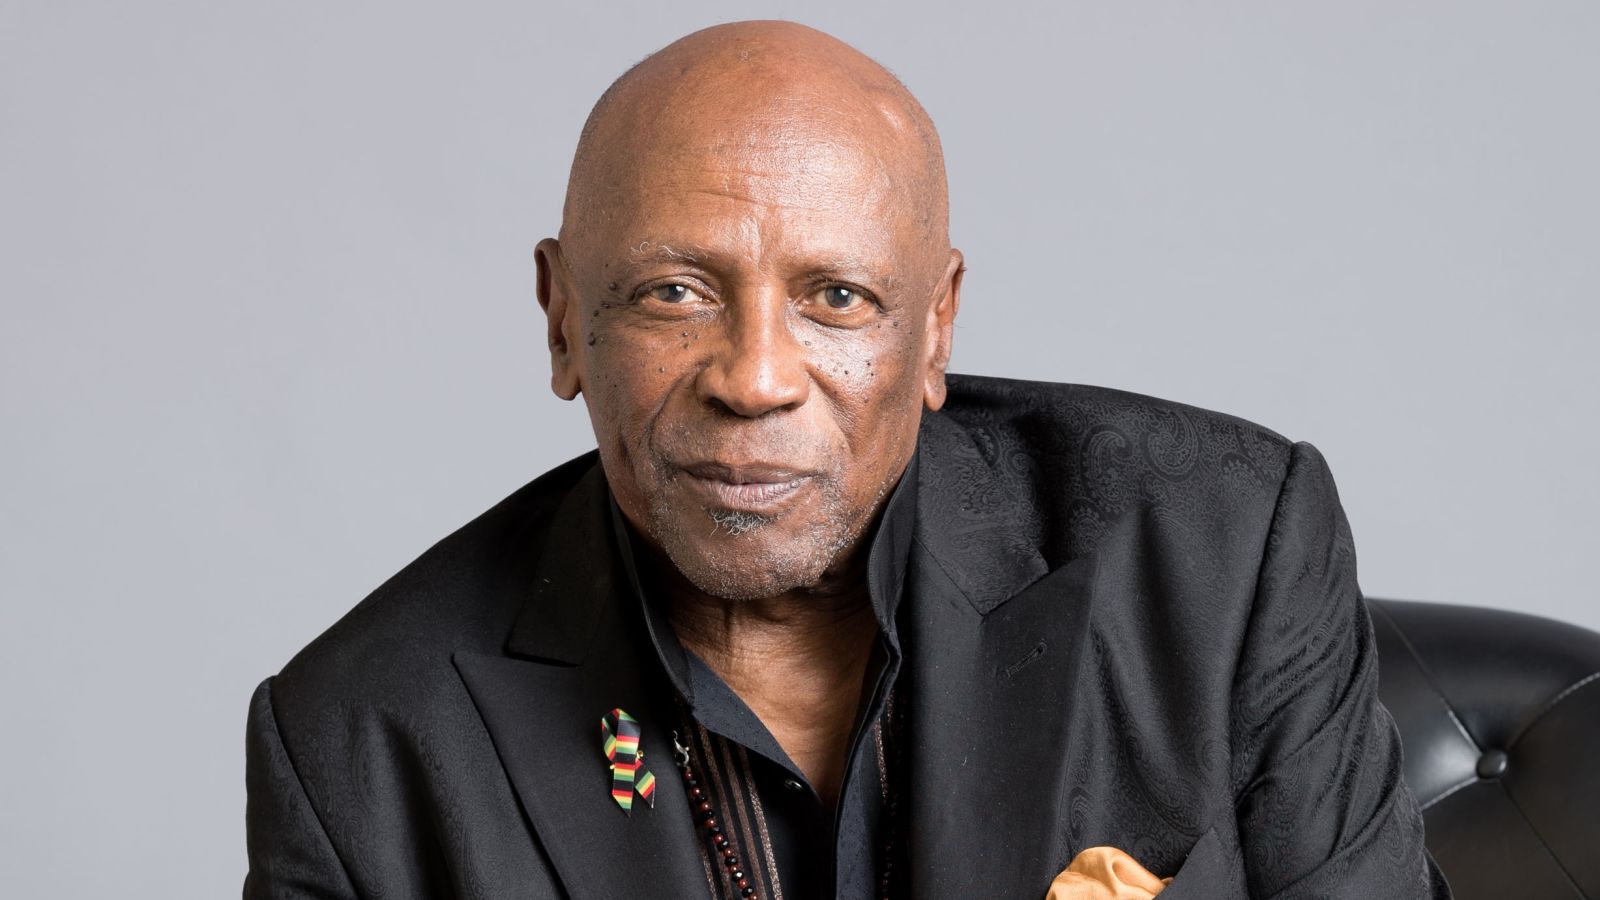 Louis Gossett Jr., star of the Oscar-winning film “An Officer and a Gentleman,” has died at the age of 87.